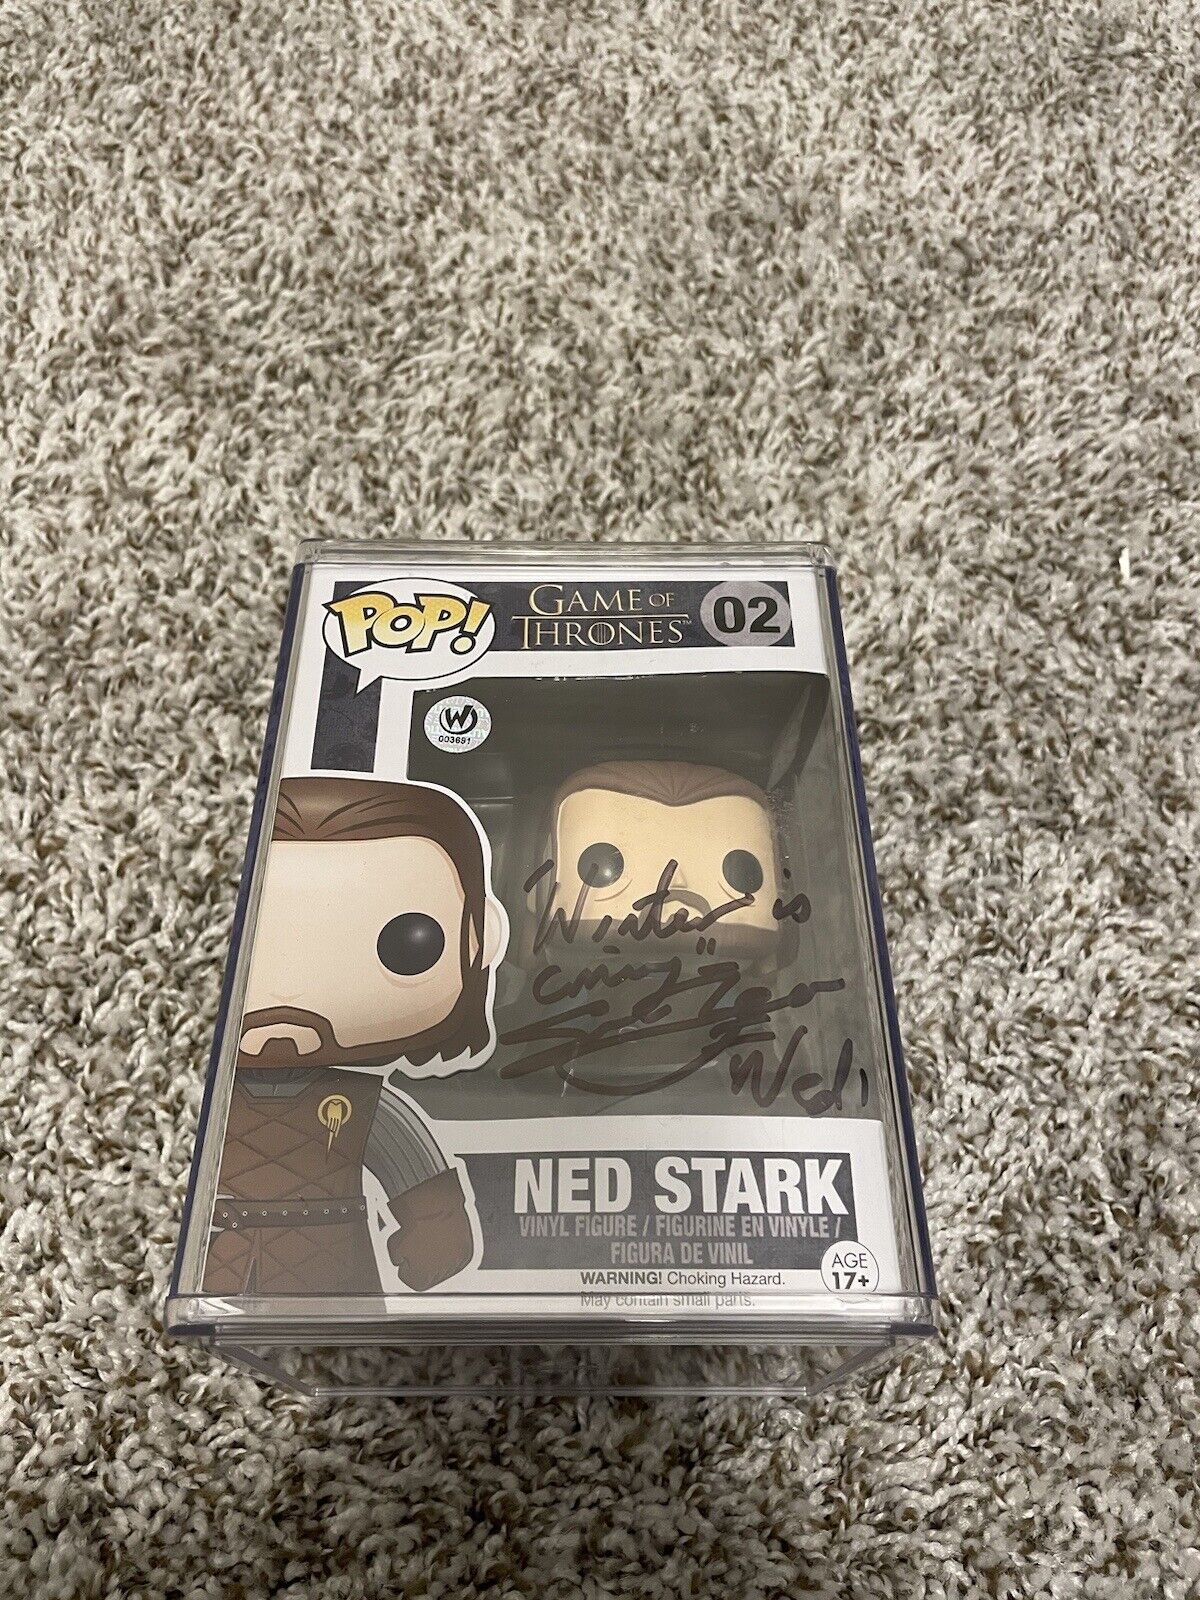 Sean Bean Signed Ned Stark #2 Game Of Thrones Funko Autographed Rare